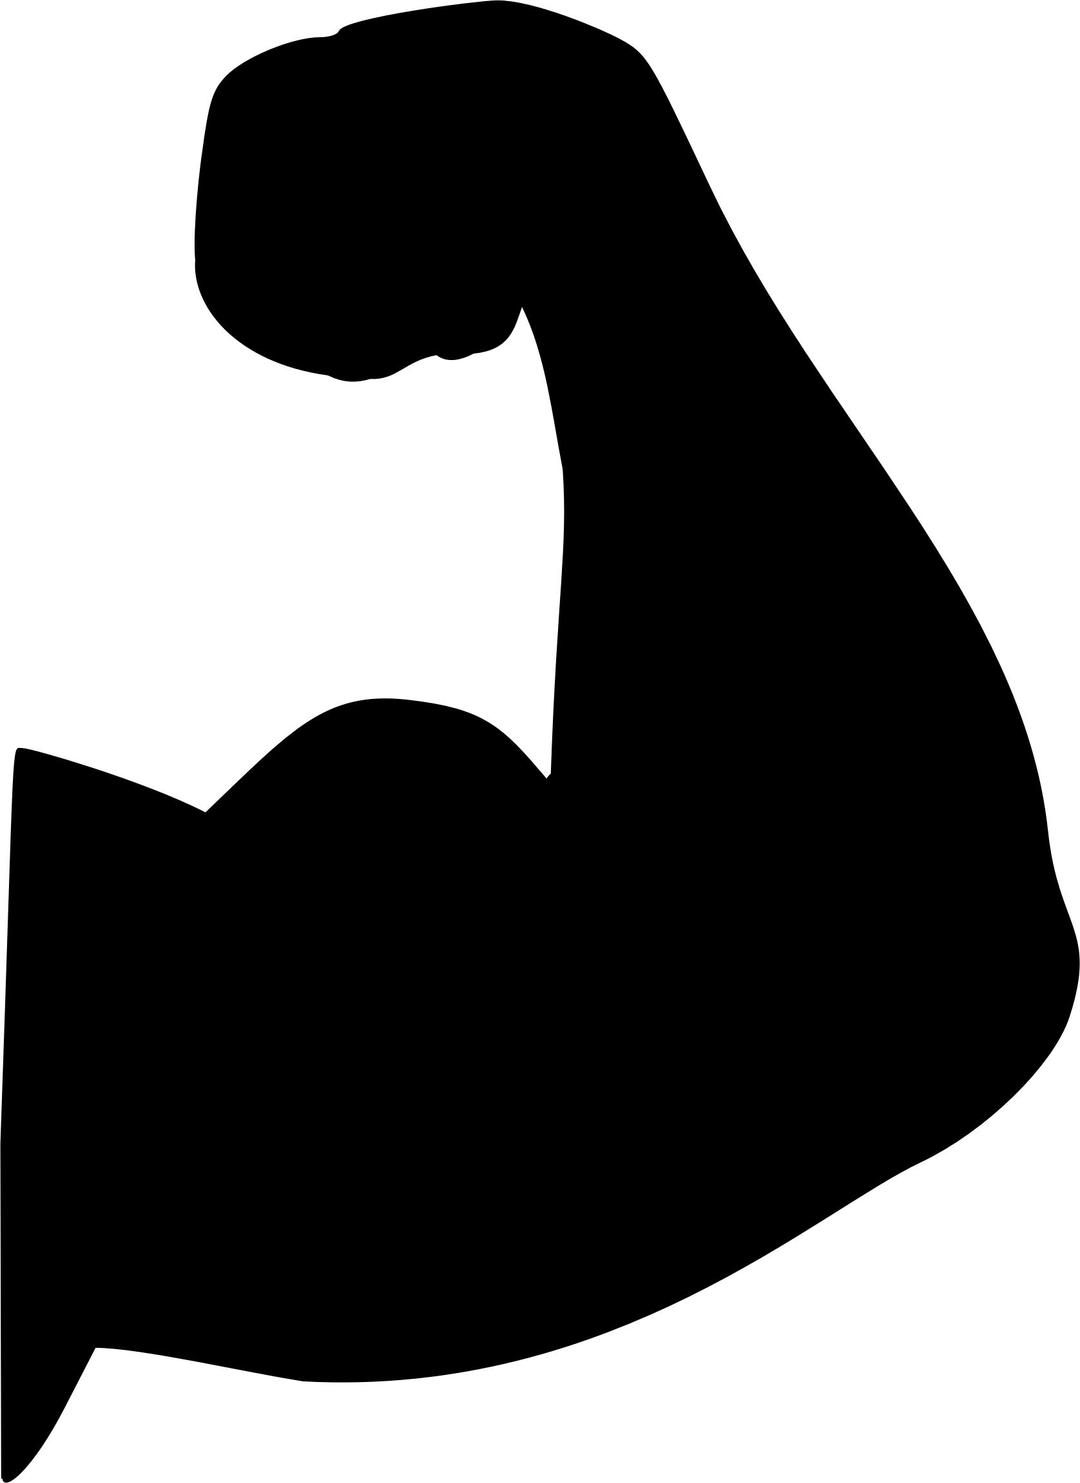 Bicep Silhouette png transparent